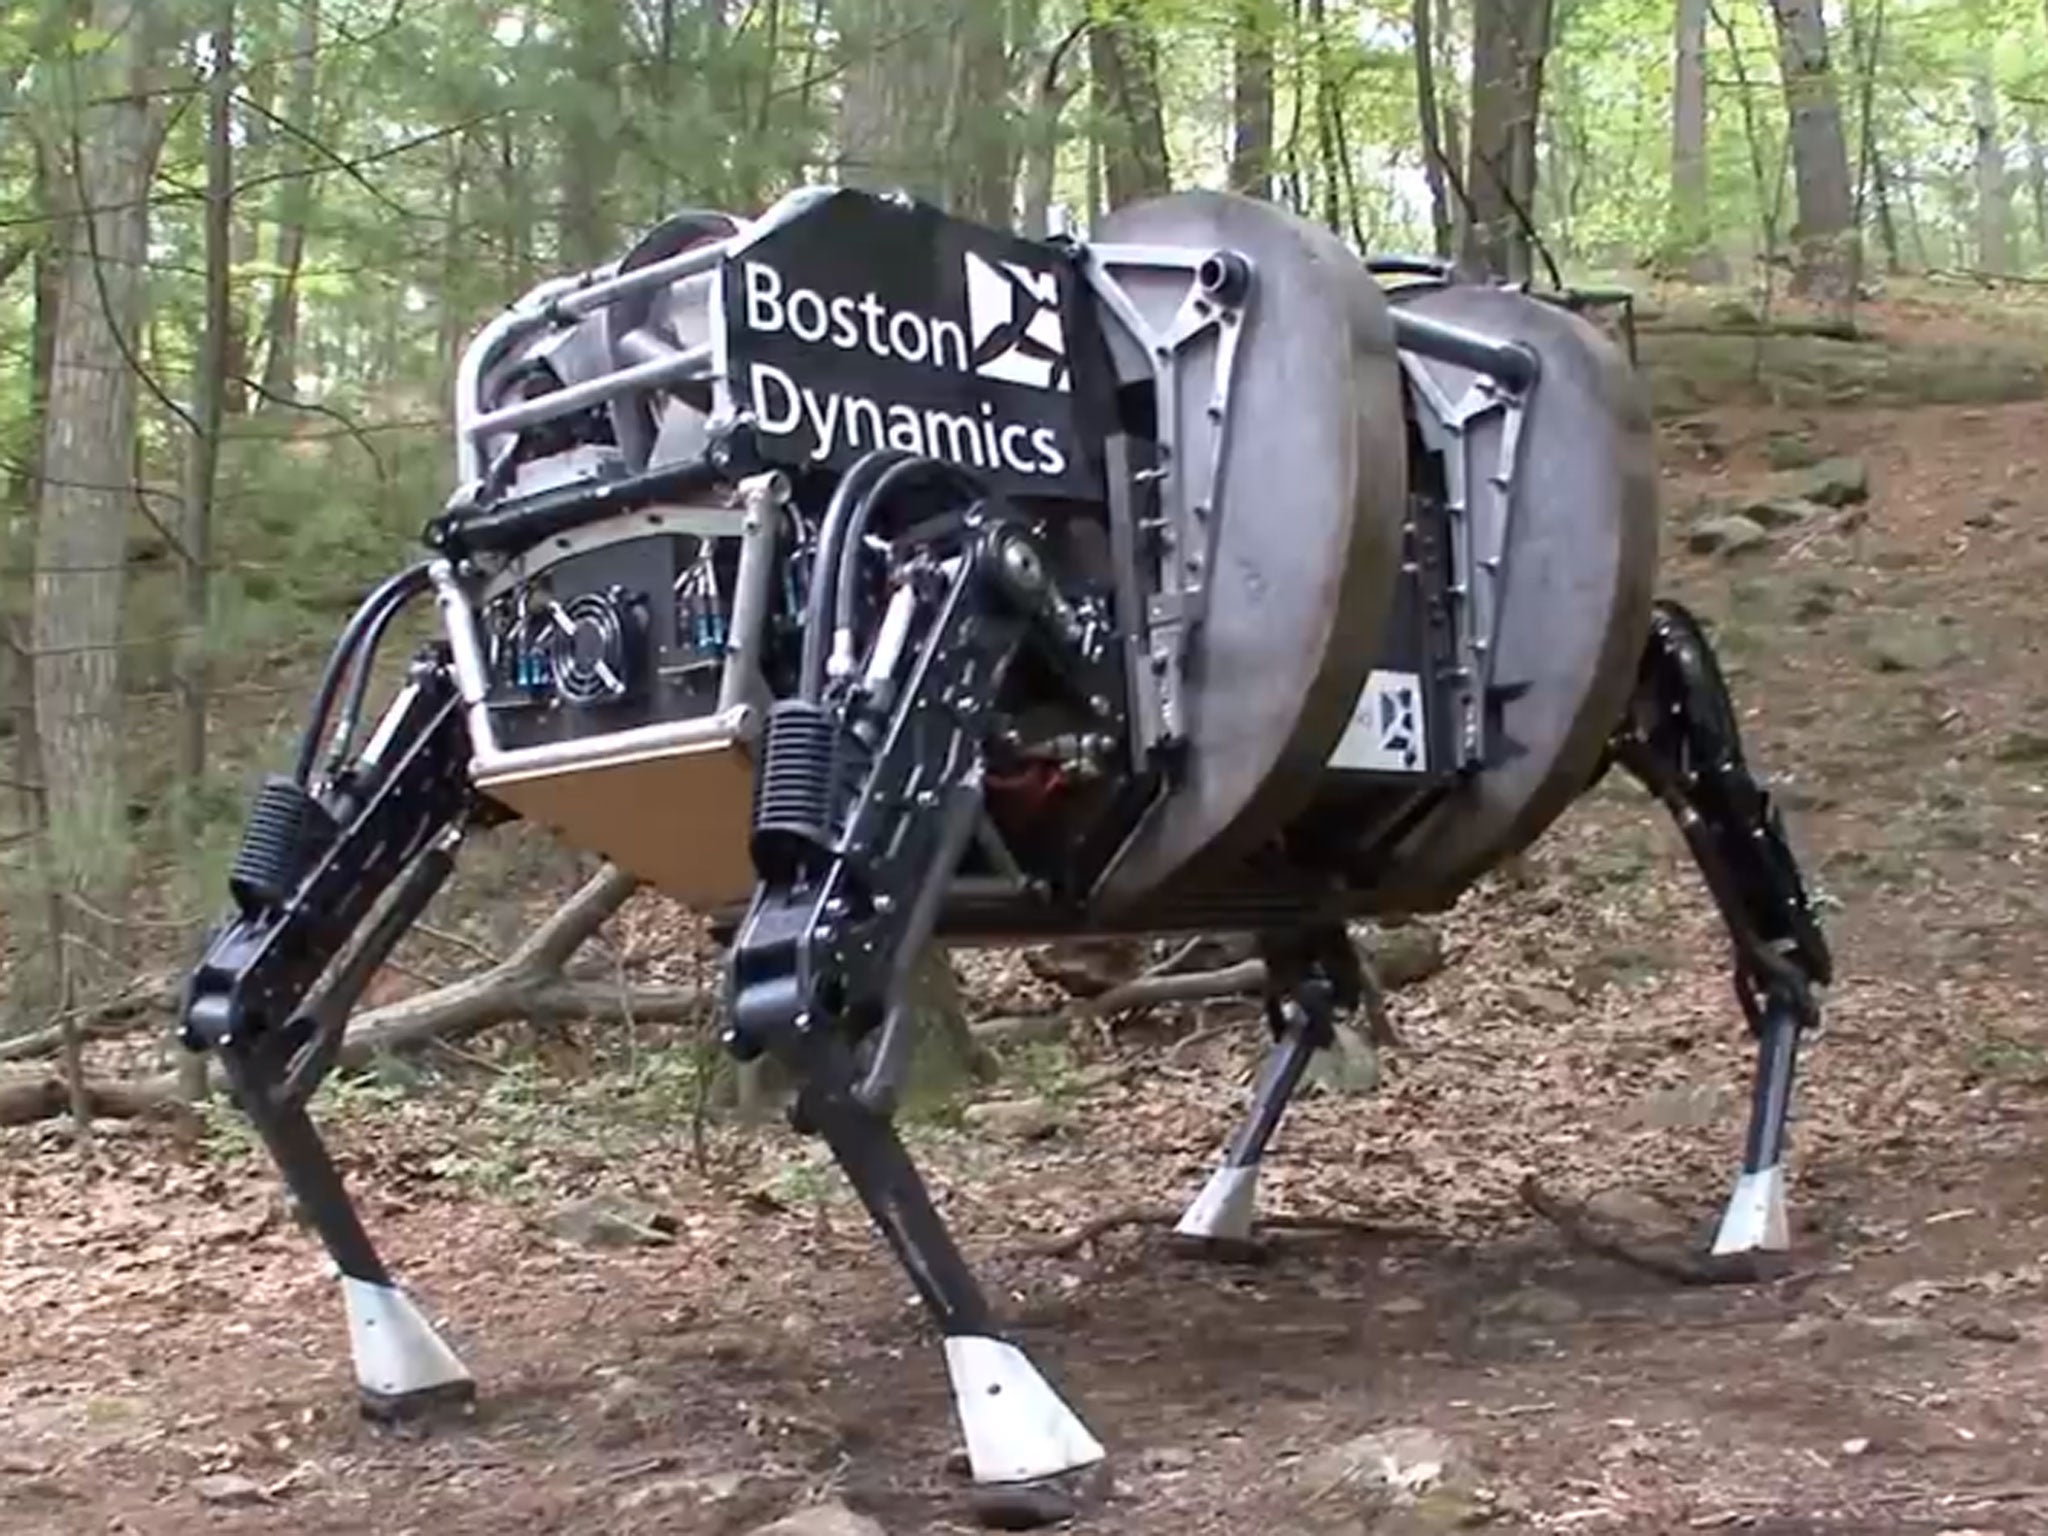 Ray Kurzweil was appointed at the end of 2012 as Google's director of engineering. The company has bought up Boston Dynamics, creator of the BigDog robots (pictured)